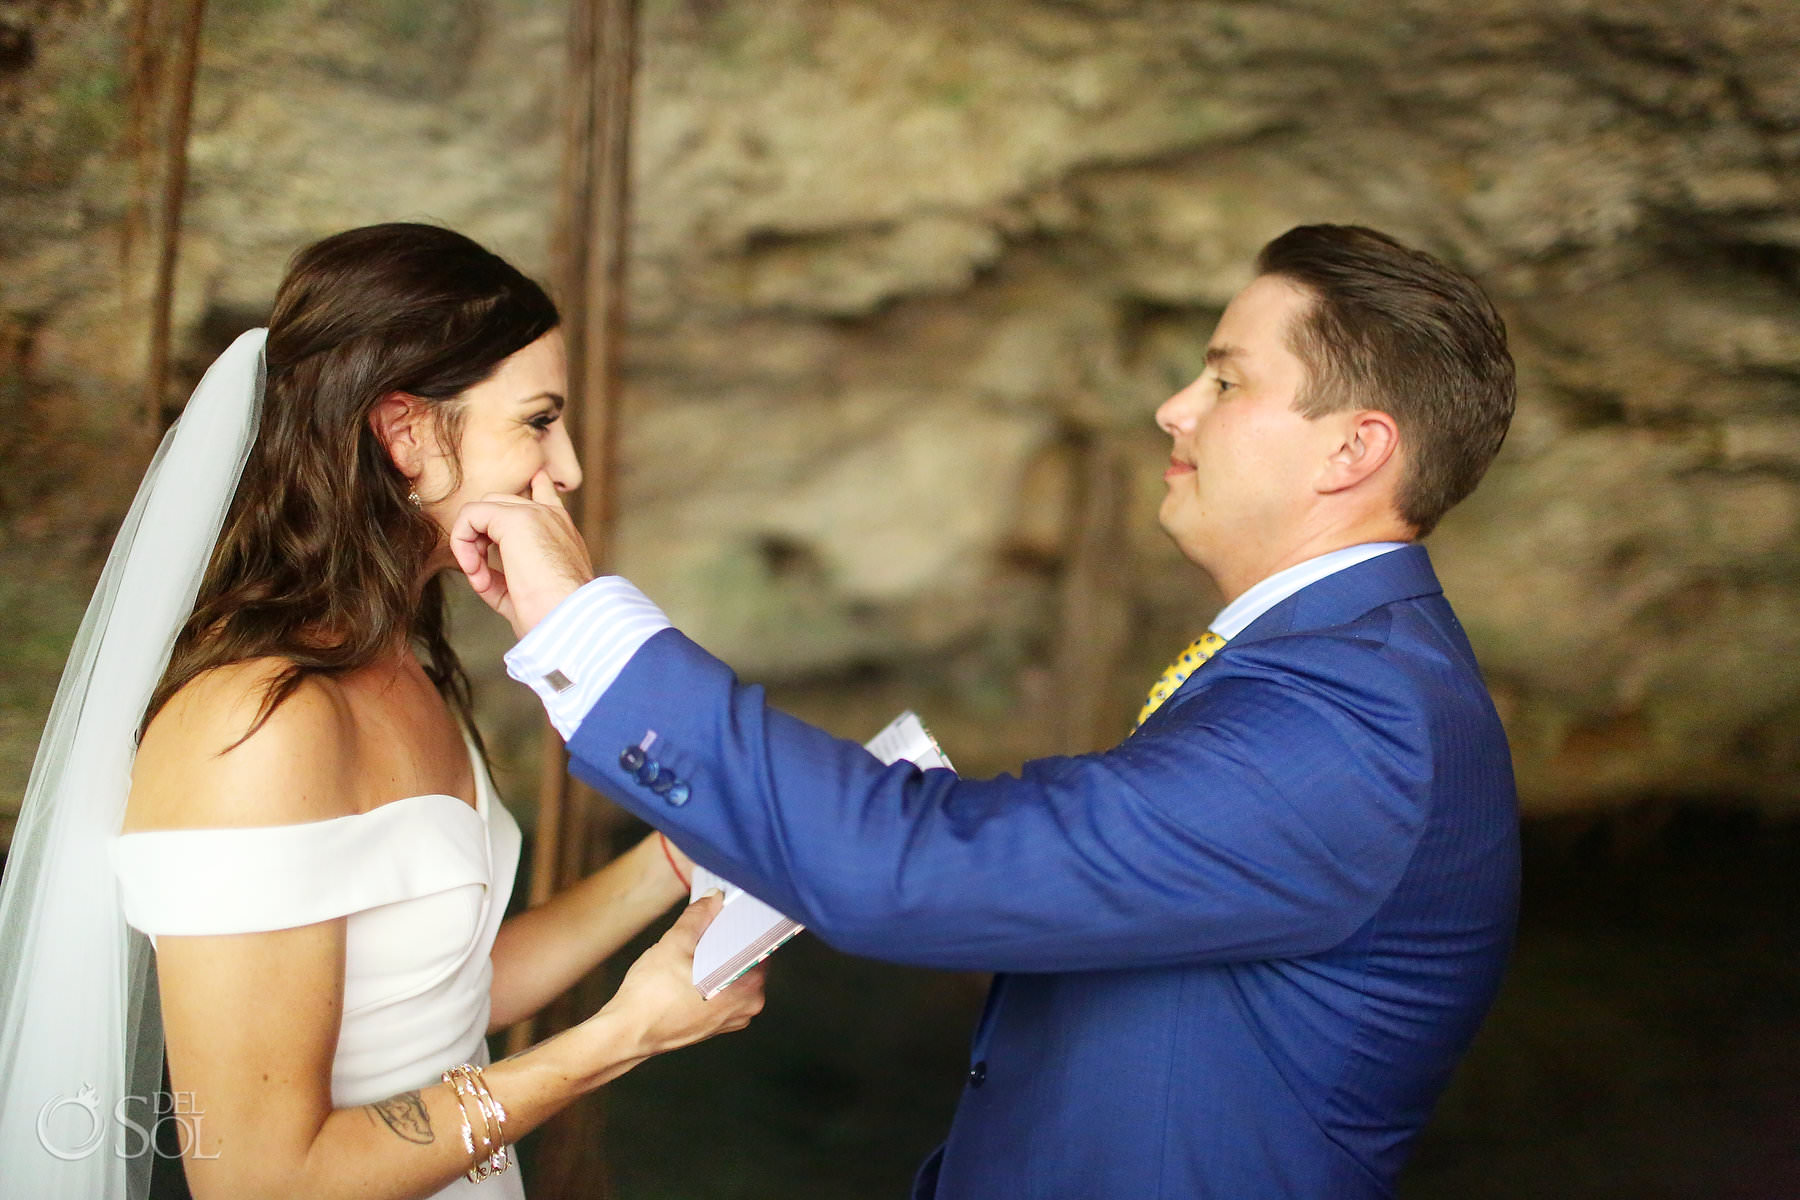 Vows Elopement ceremony underground in Mexican cenotes